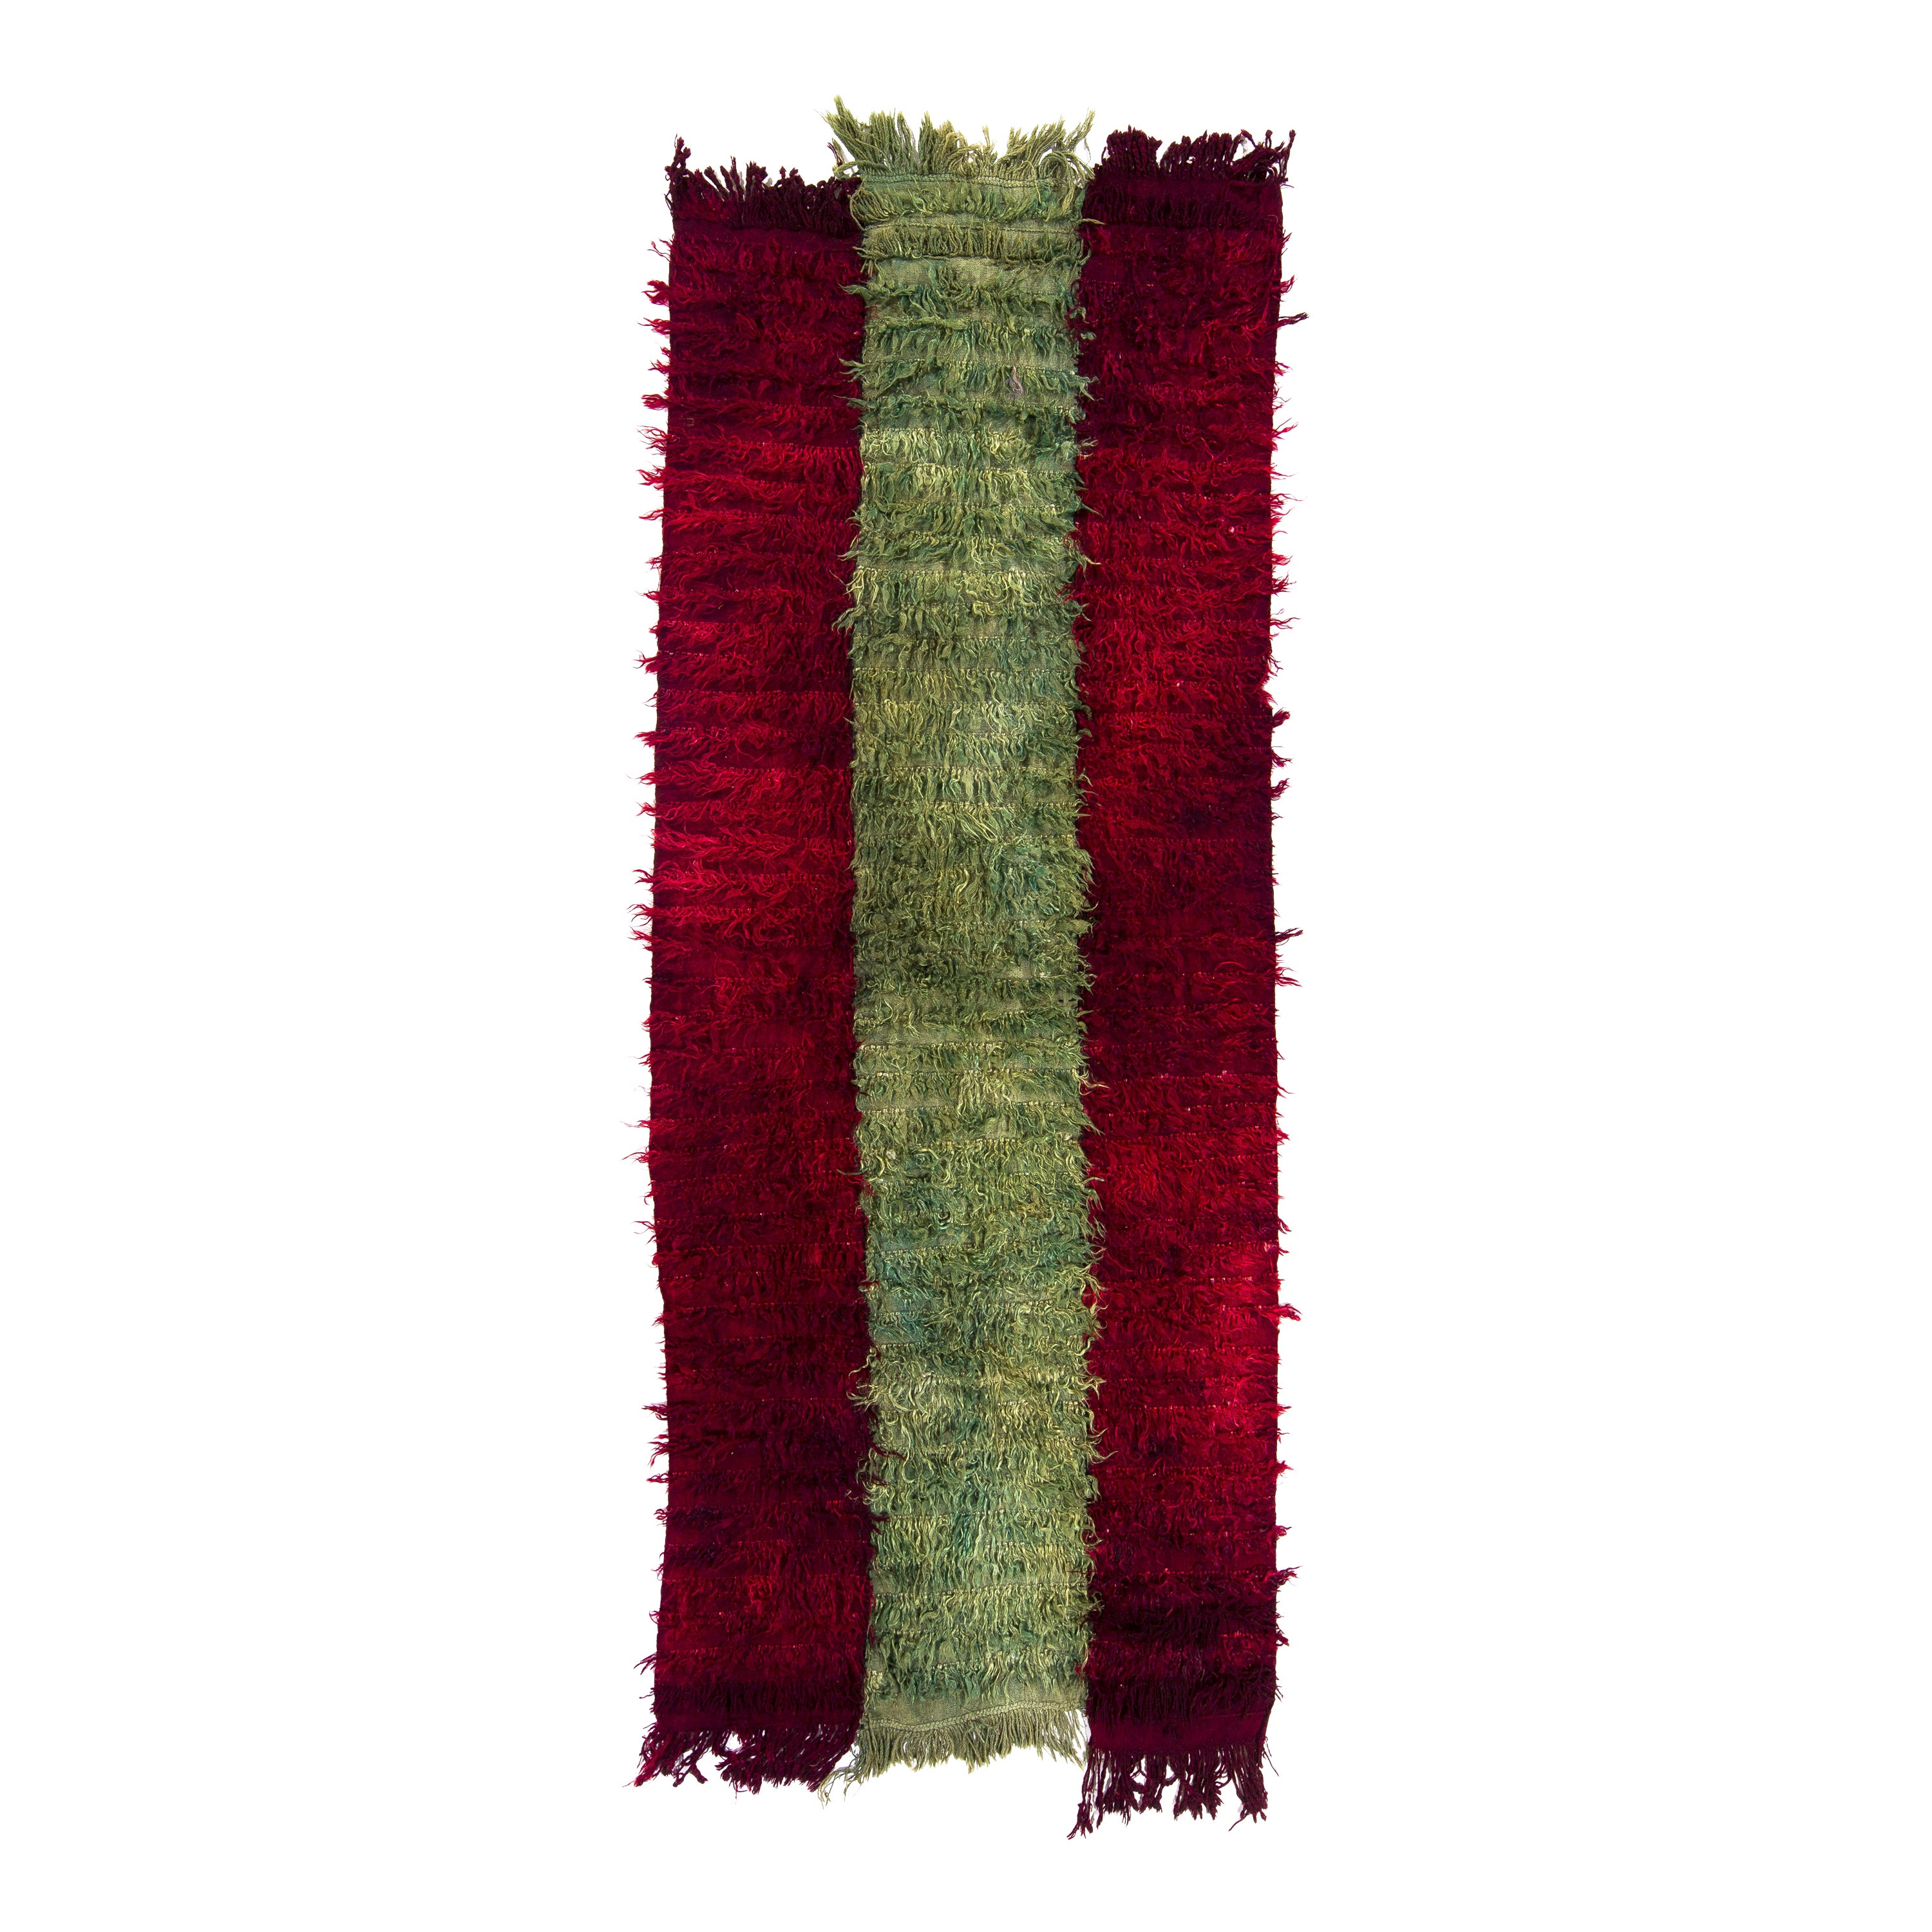 4.7x11.2 Ft Vintage Filikli Tulu Rug Made of Mohair Wool, Red and Green Colors For Sale